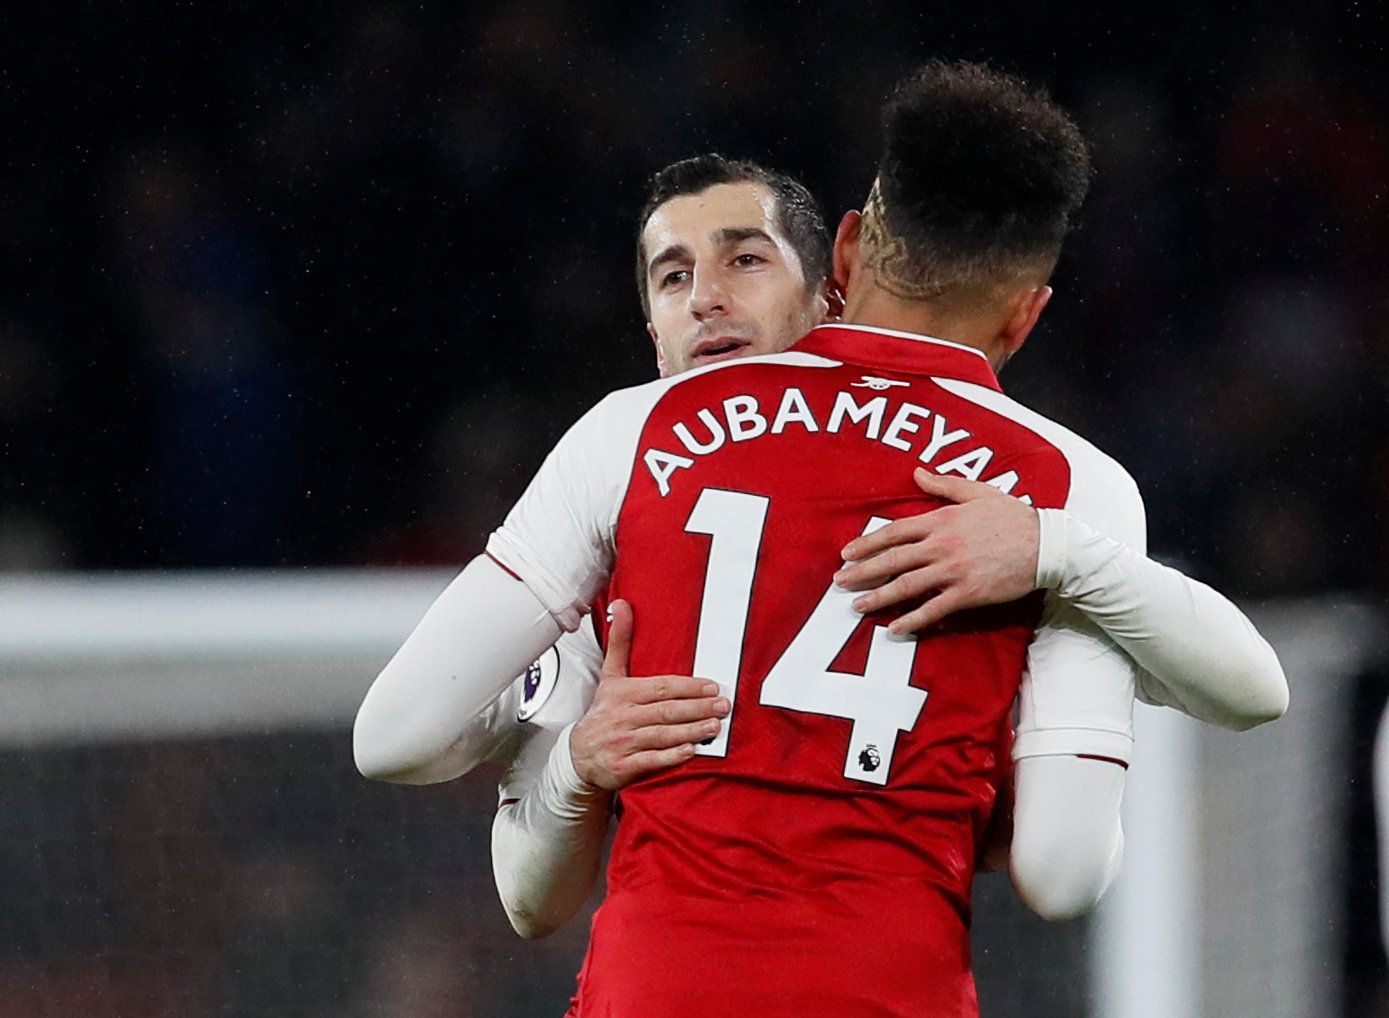 Soccer Football - Premier League - Arsenal vs Everton - Emirates Stadium, London, Britain - February 3, 2018   Arsenal's Henrikh Mkhitaryan and Pierre-Emerick Aubameyang celebrate after the match    REUTERS/David Klein    EDITORIAL USE ONLY. No use with unauthorized audio, video, data, fixture lists, club/league logos or 